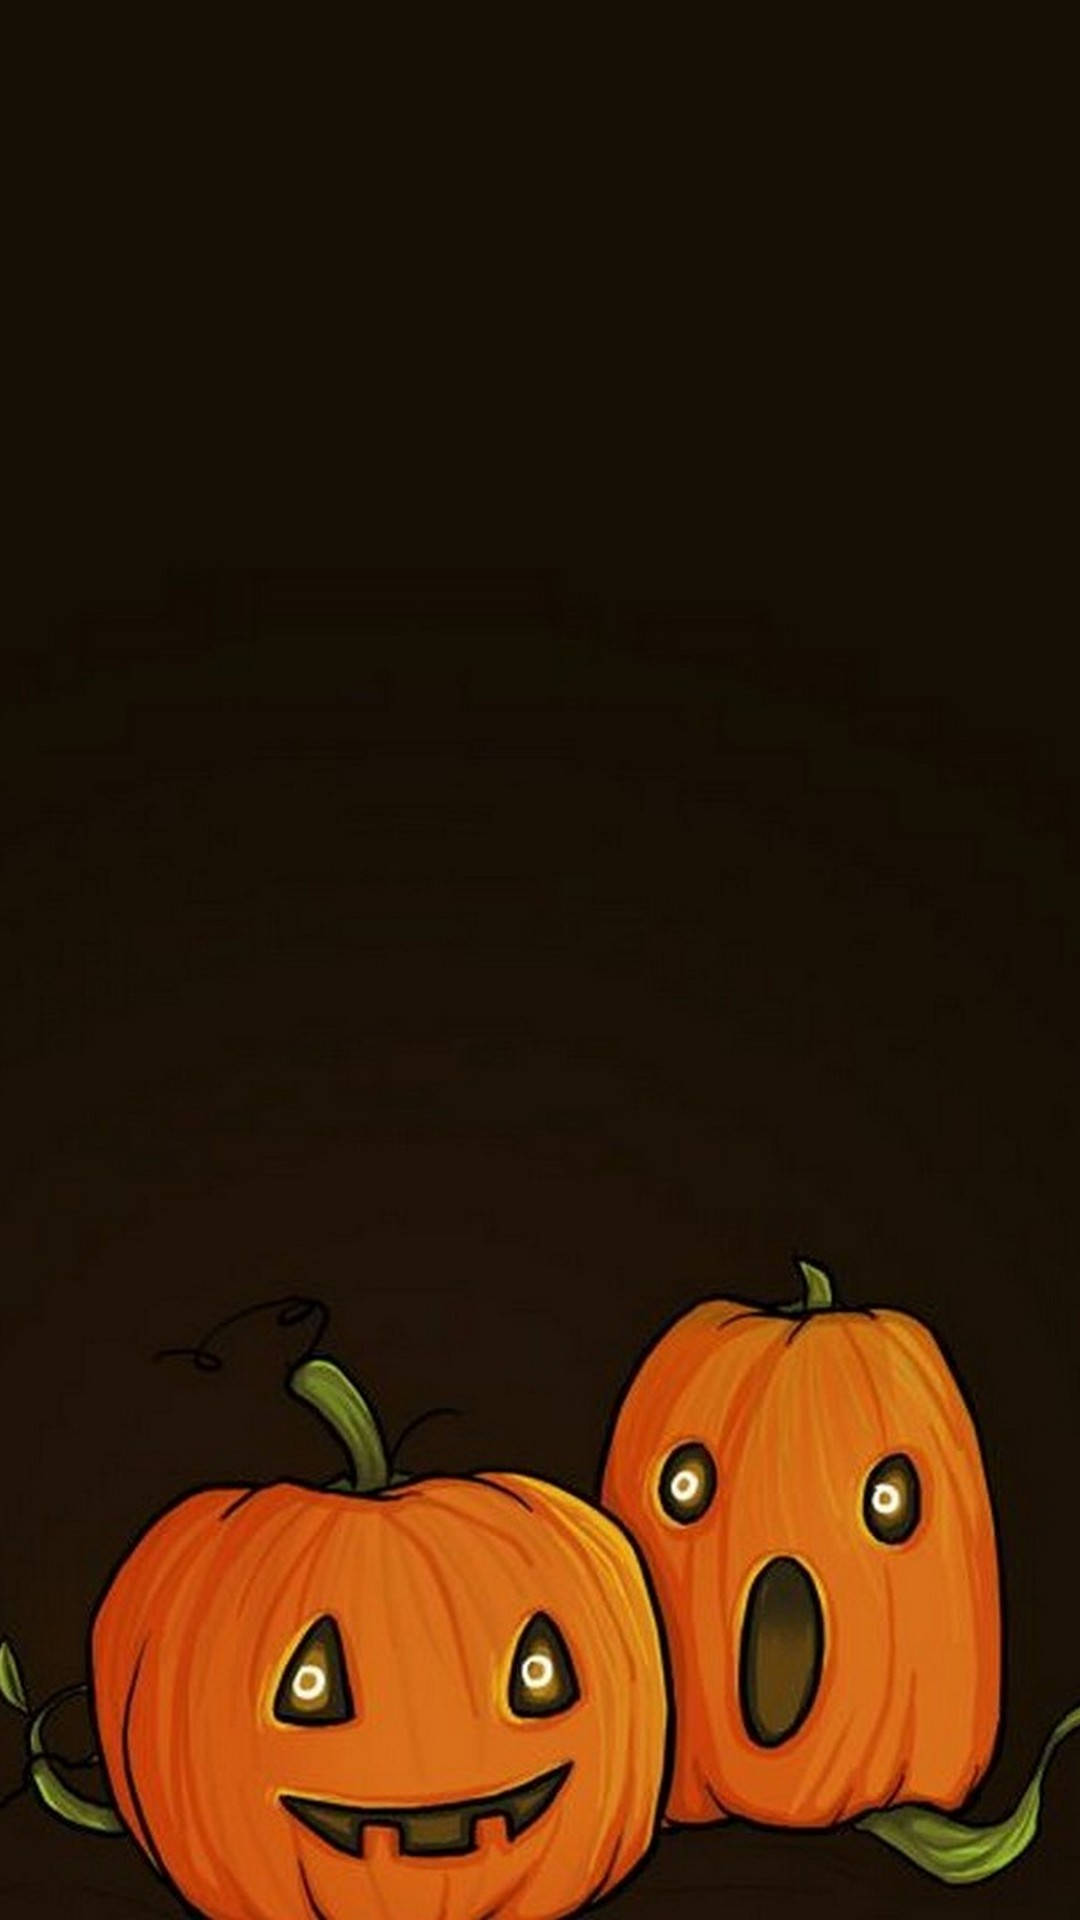 Get Ready For Halloween - Add Some Fun To Your Phone Wallpaper